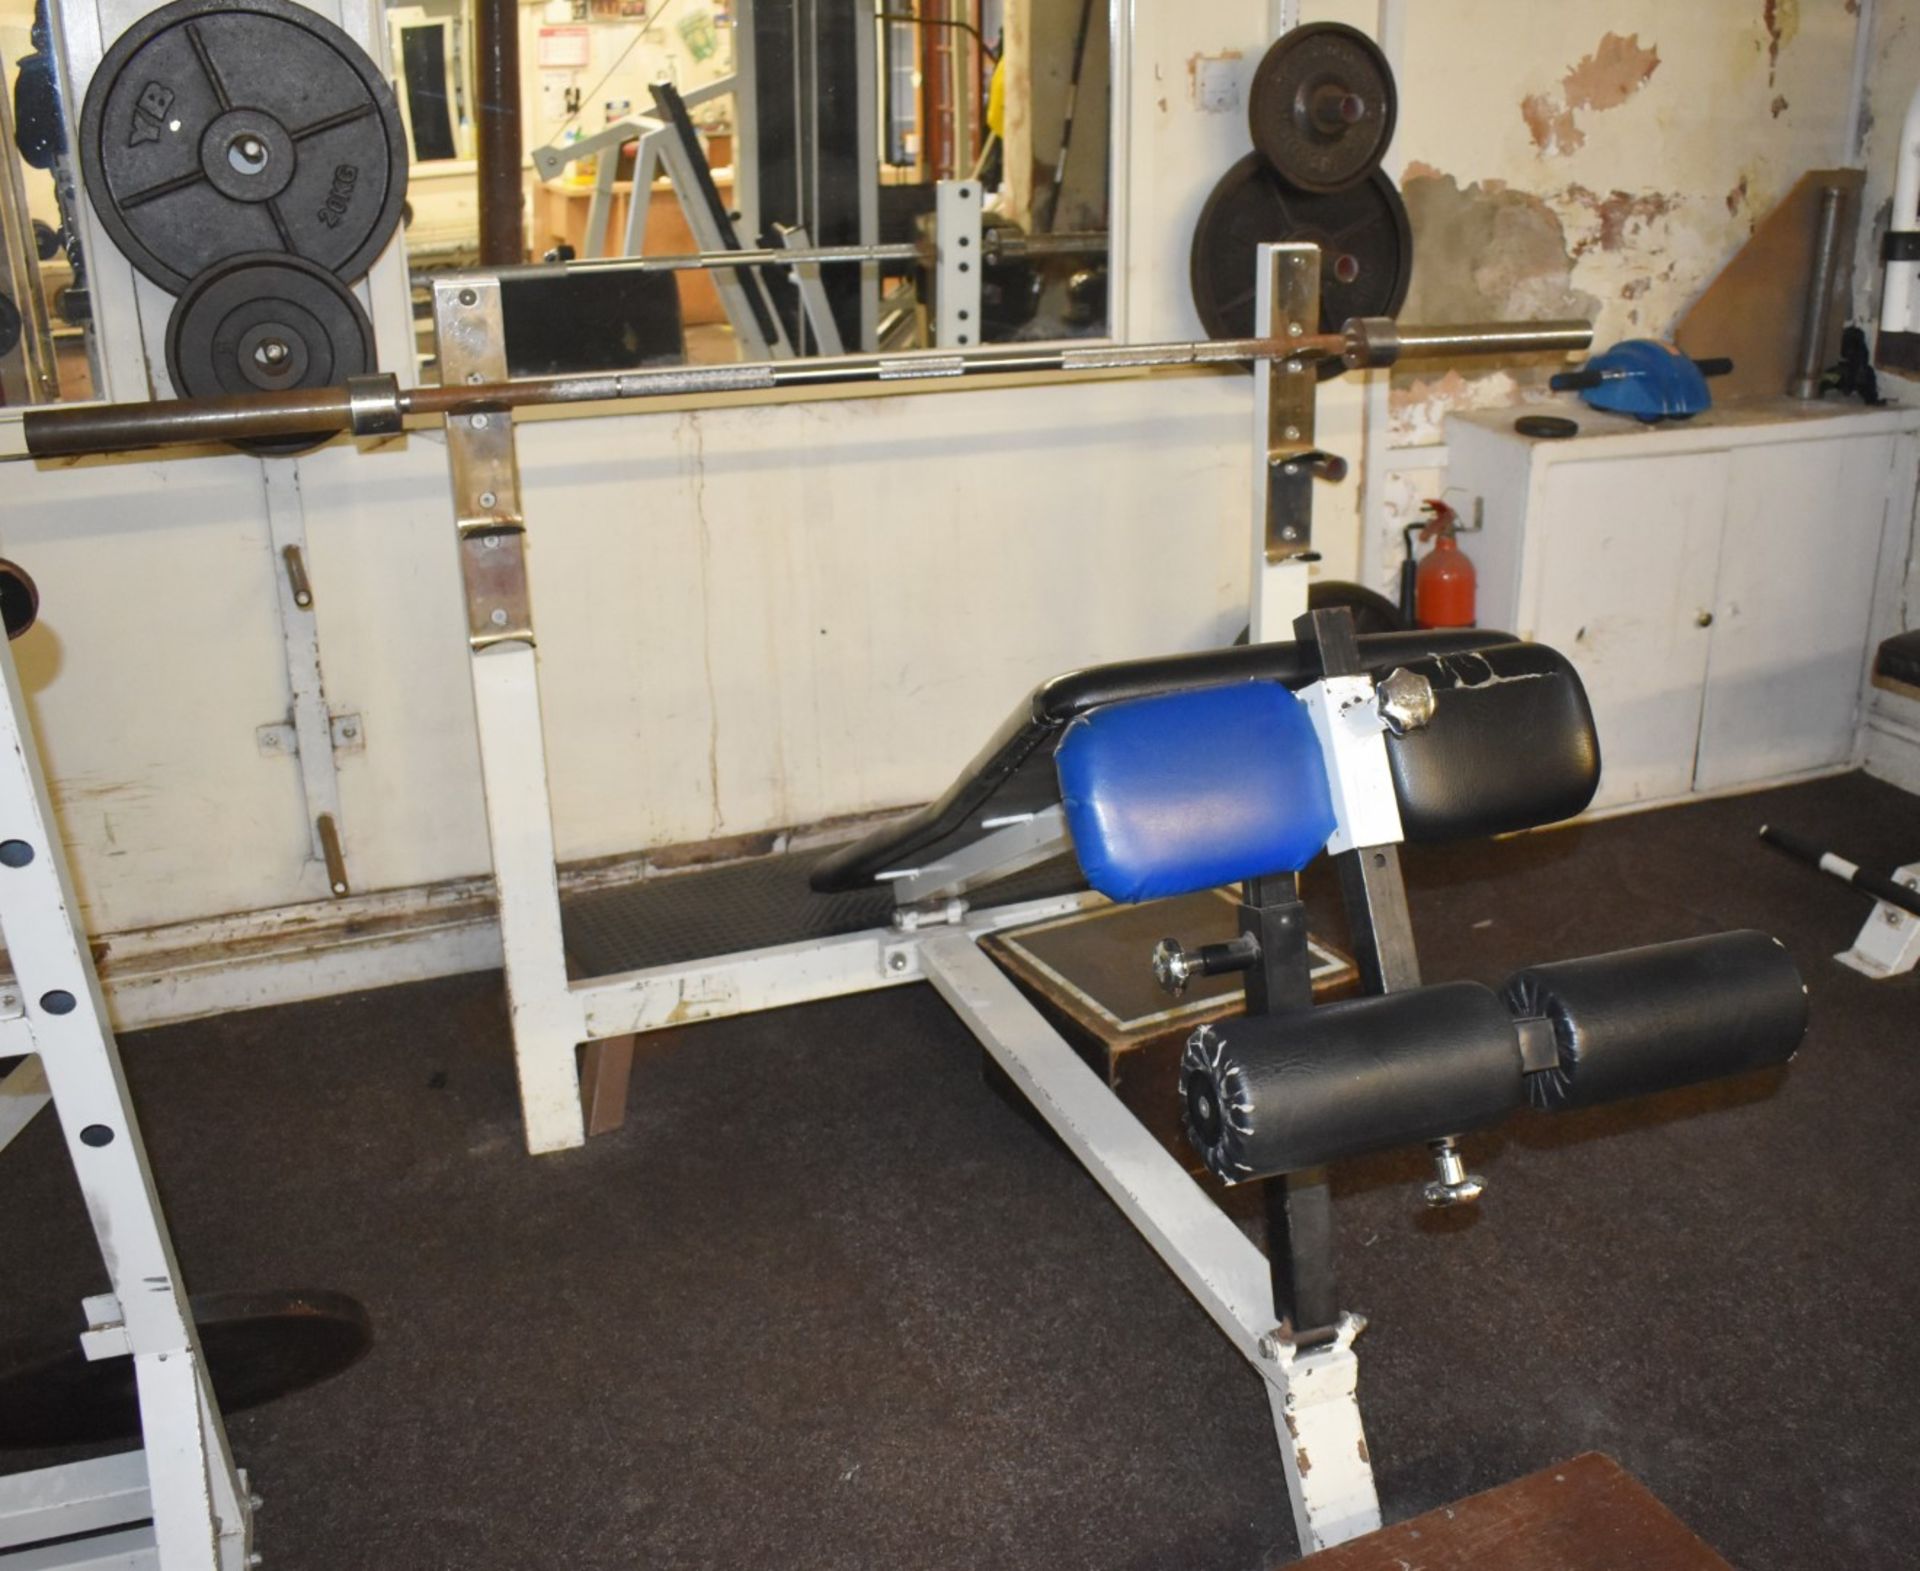 Contents of Bodybuilding and Strongman Gym - Includes Approx 30 Pieces of Gym Equipment, Floor Mats, - Image 19 of 31